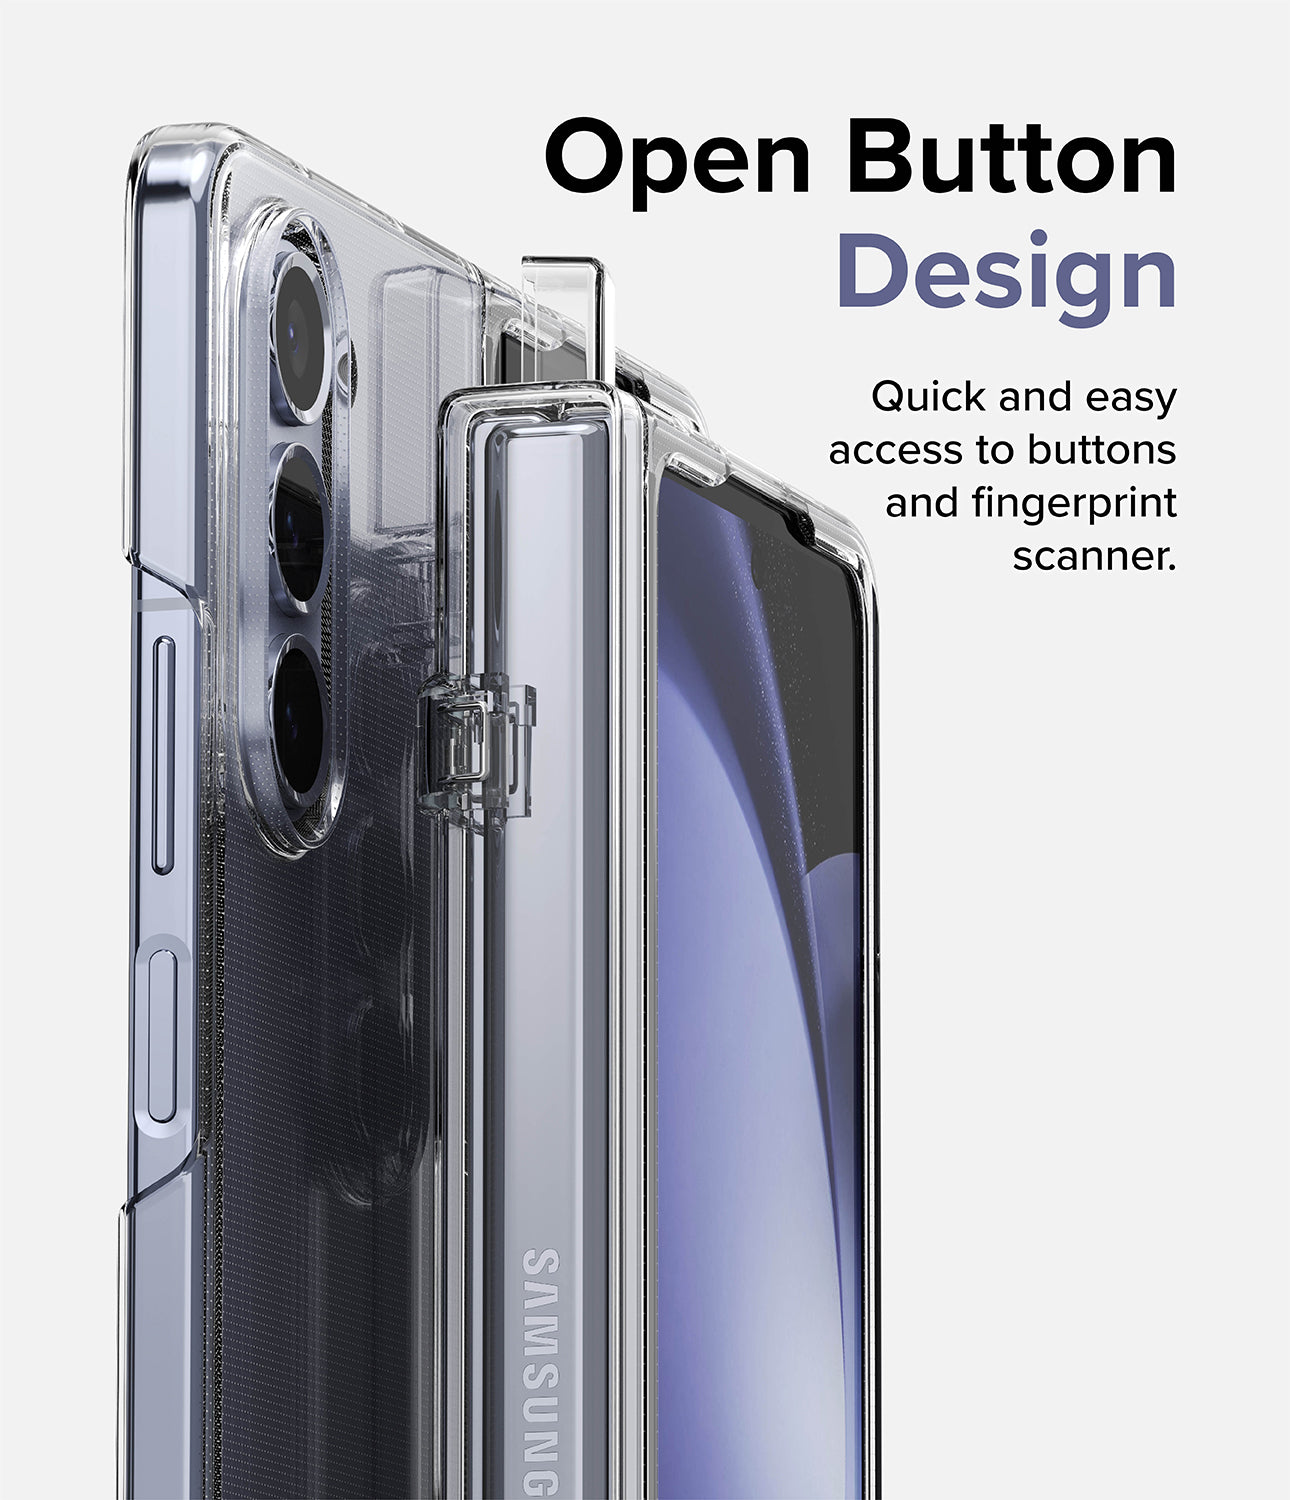 Galaxy Z Fold 5 Case | Slim Hinge - Open Button Design. Quick and easy access to buttons and fingerprint scanner.